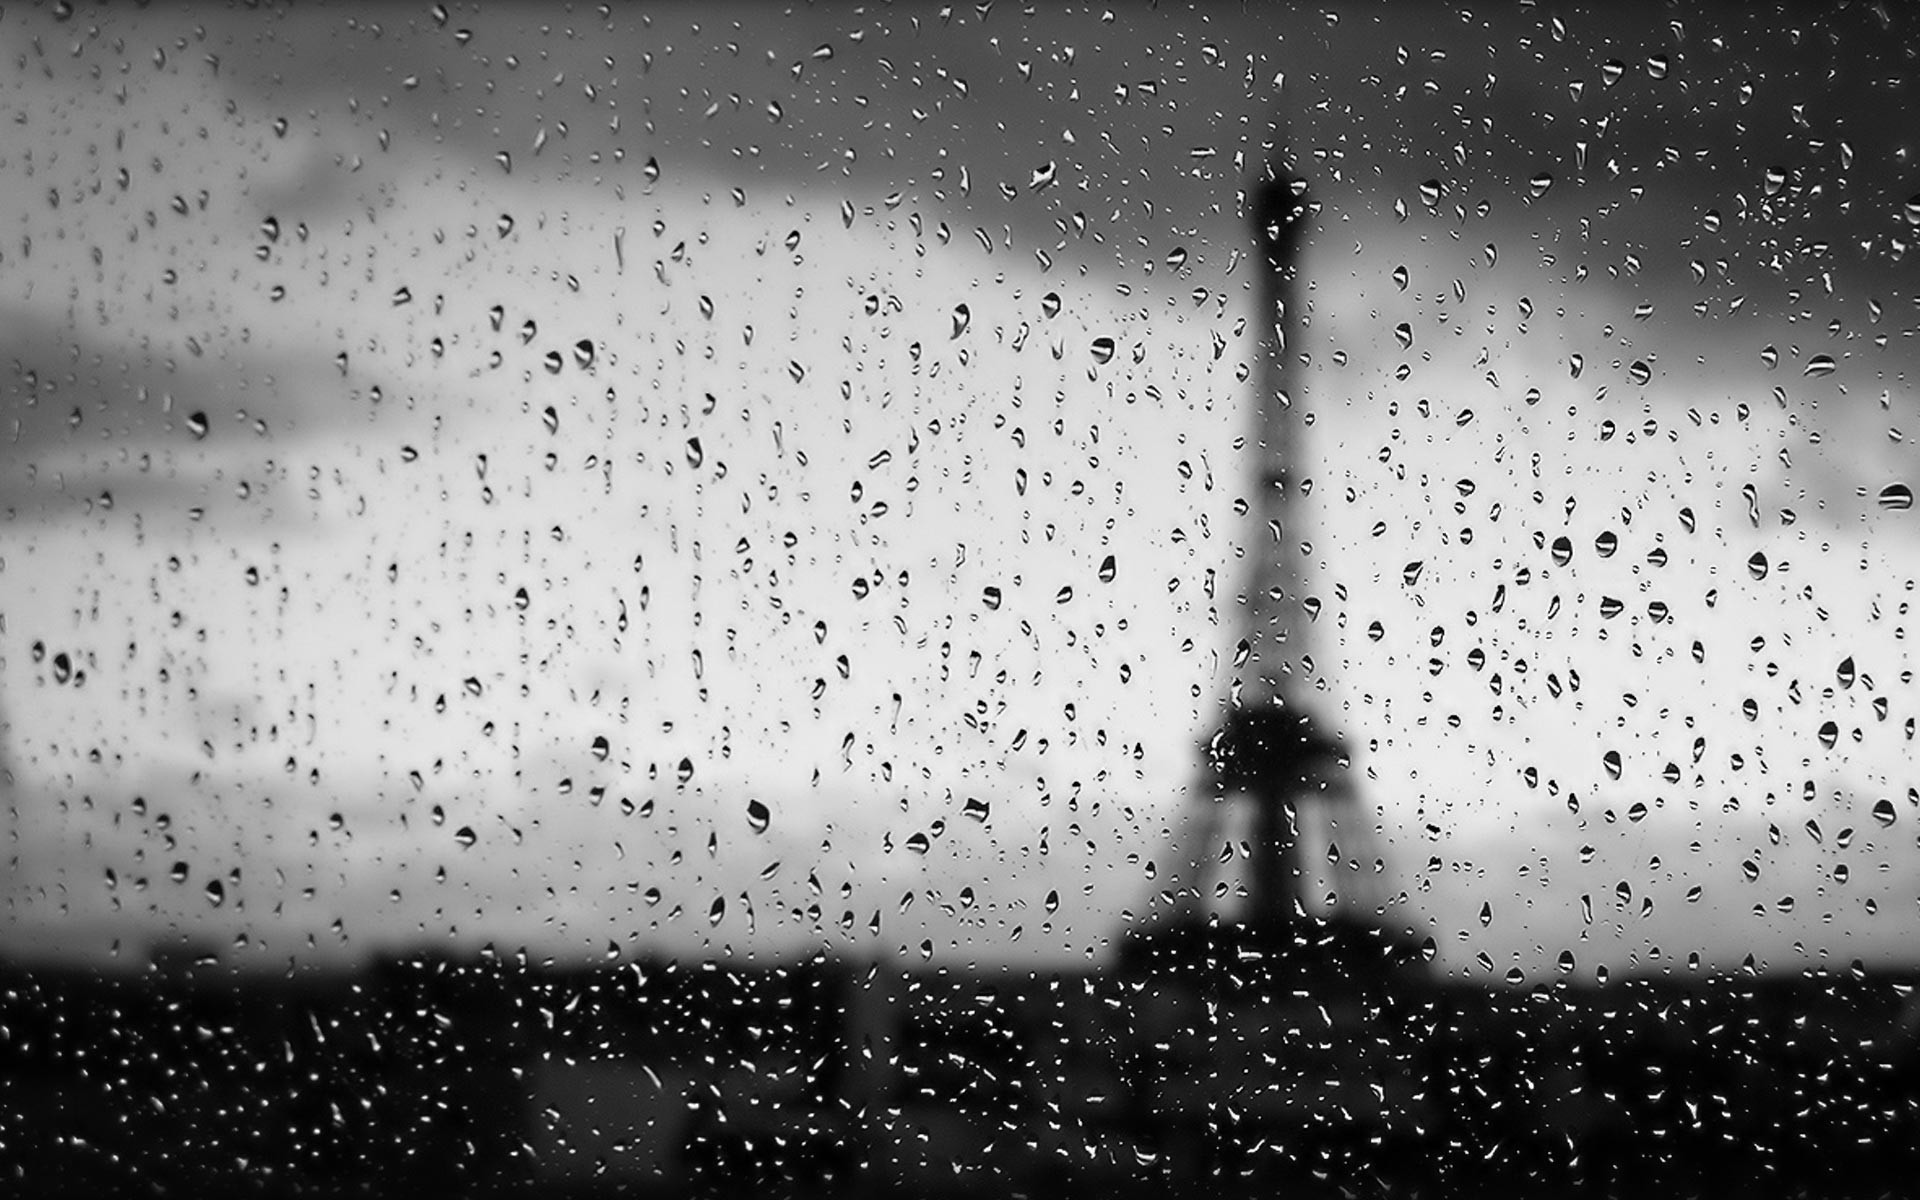 Rain wallpaper HD ·① Download free awesome full HD wallpapers for desktop and mobile devices in 